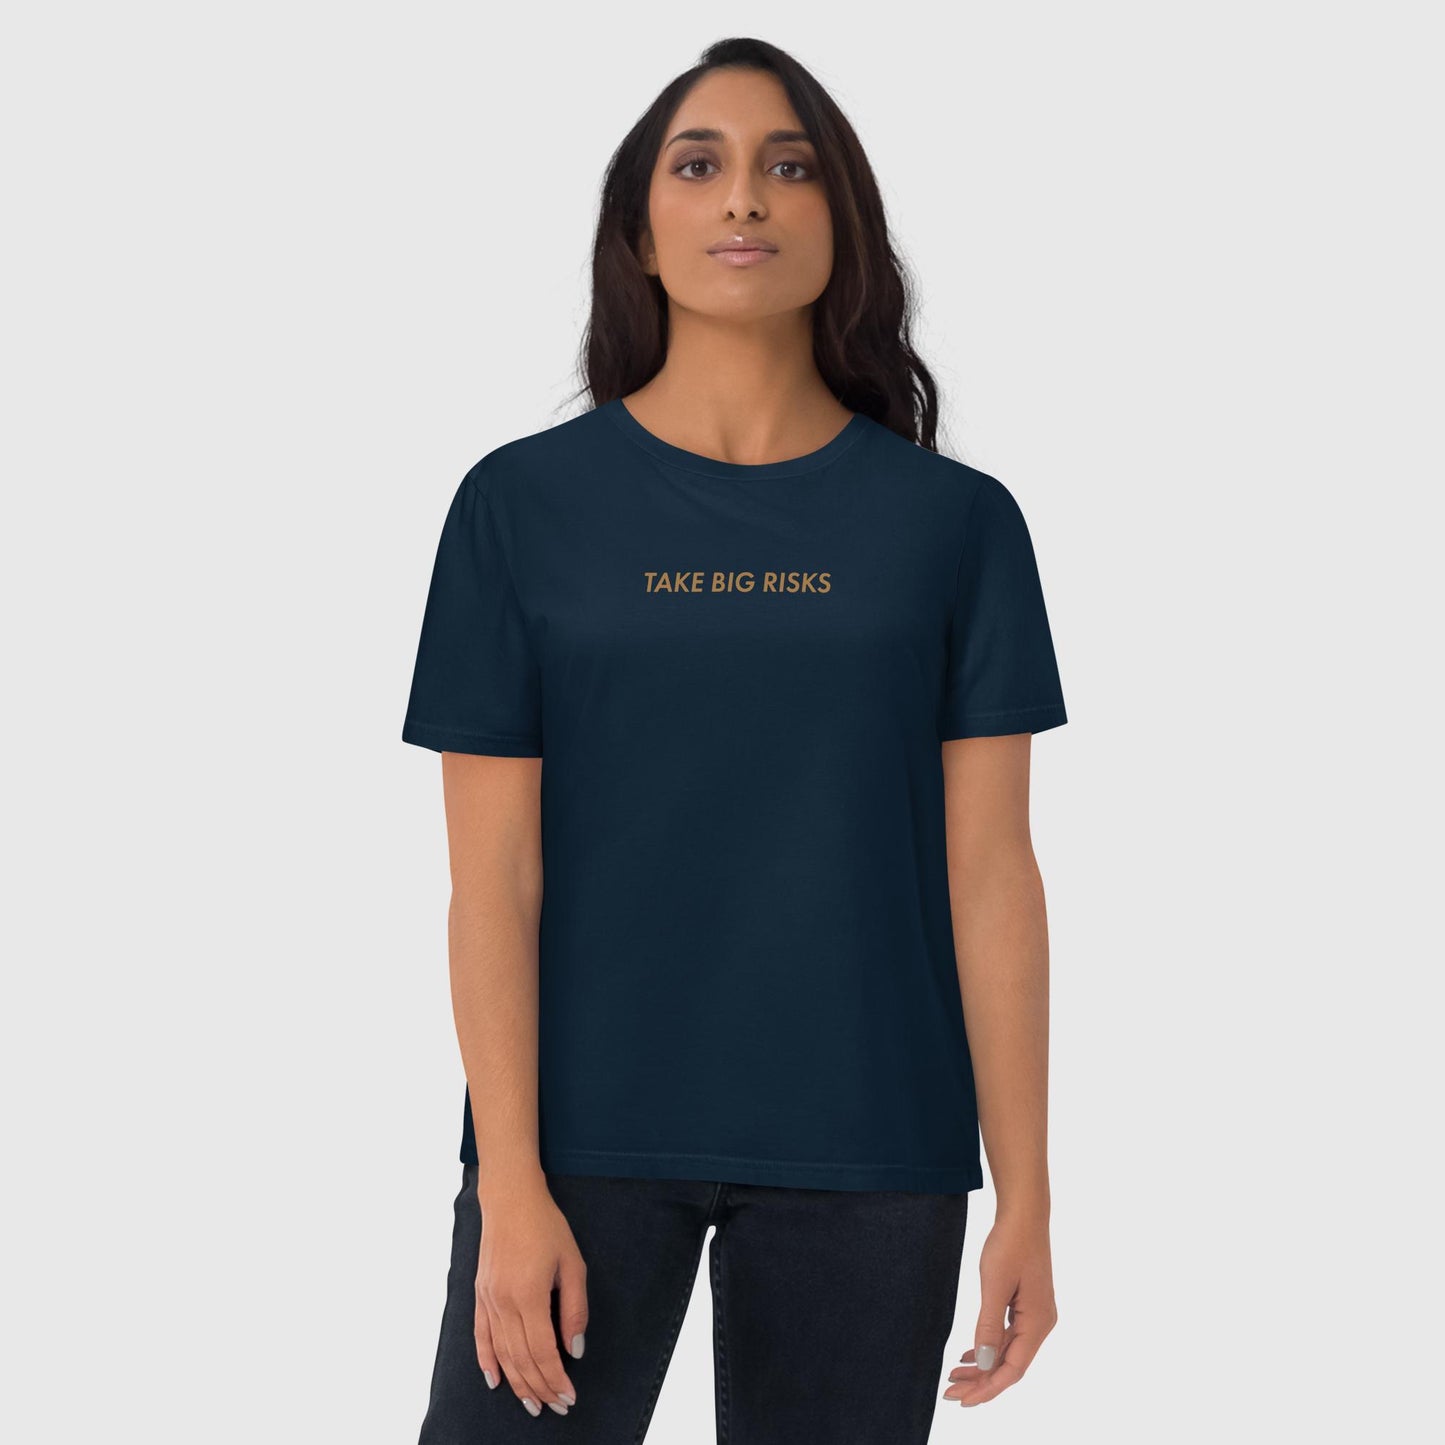 Women's french navy oversized organic cotton t-shirt that features Bill Gates' quote on success, "Take Big Risks." 